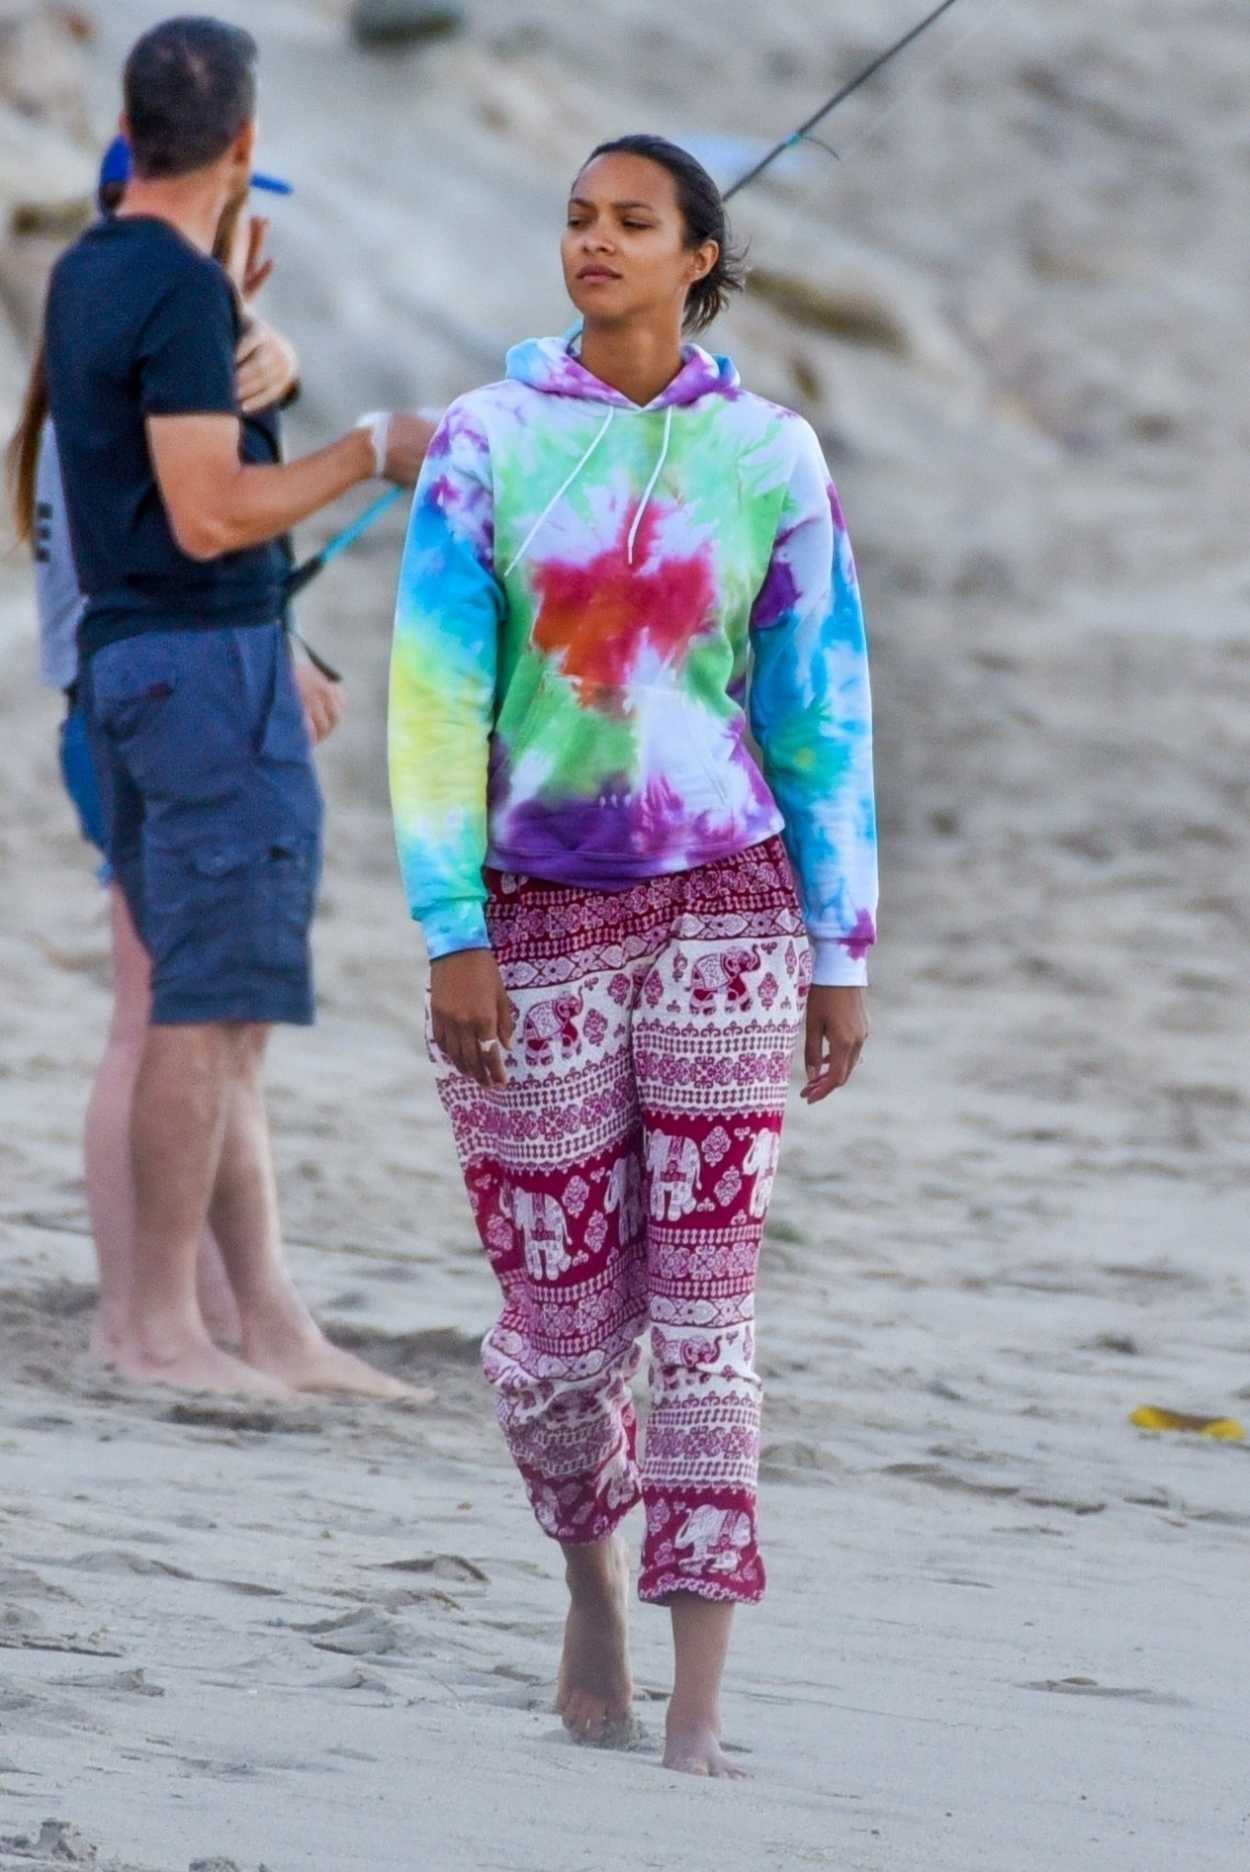 Lais Ribeiro In A Full Colour Hoody Was Seen Out With